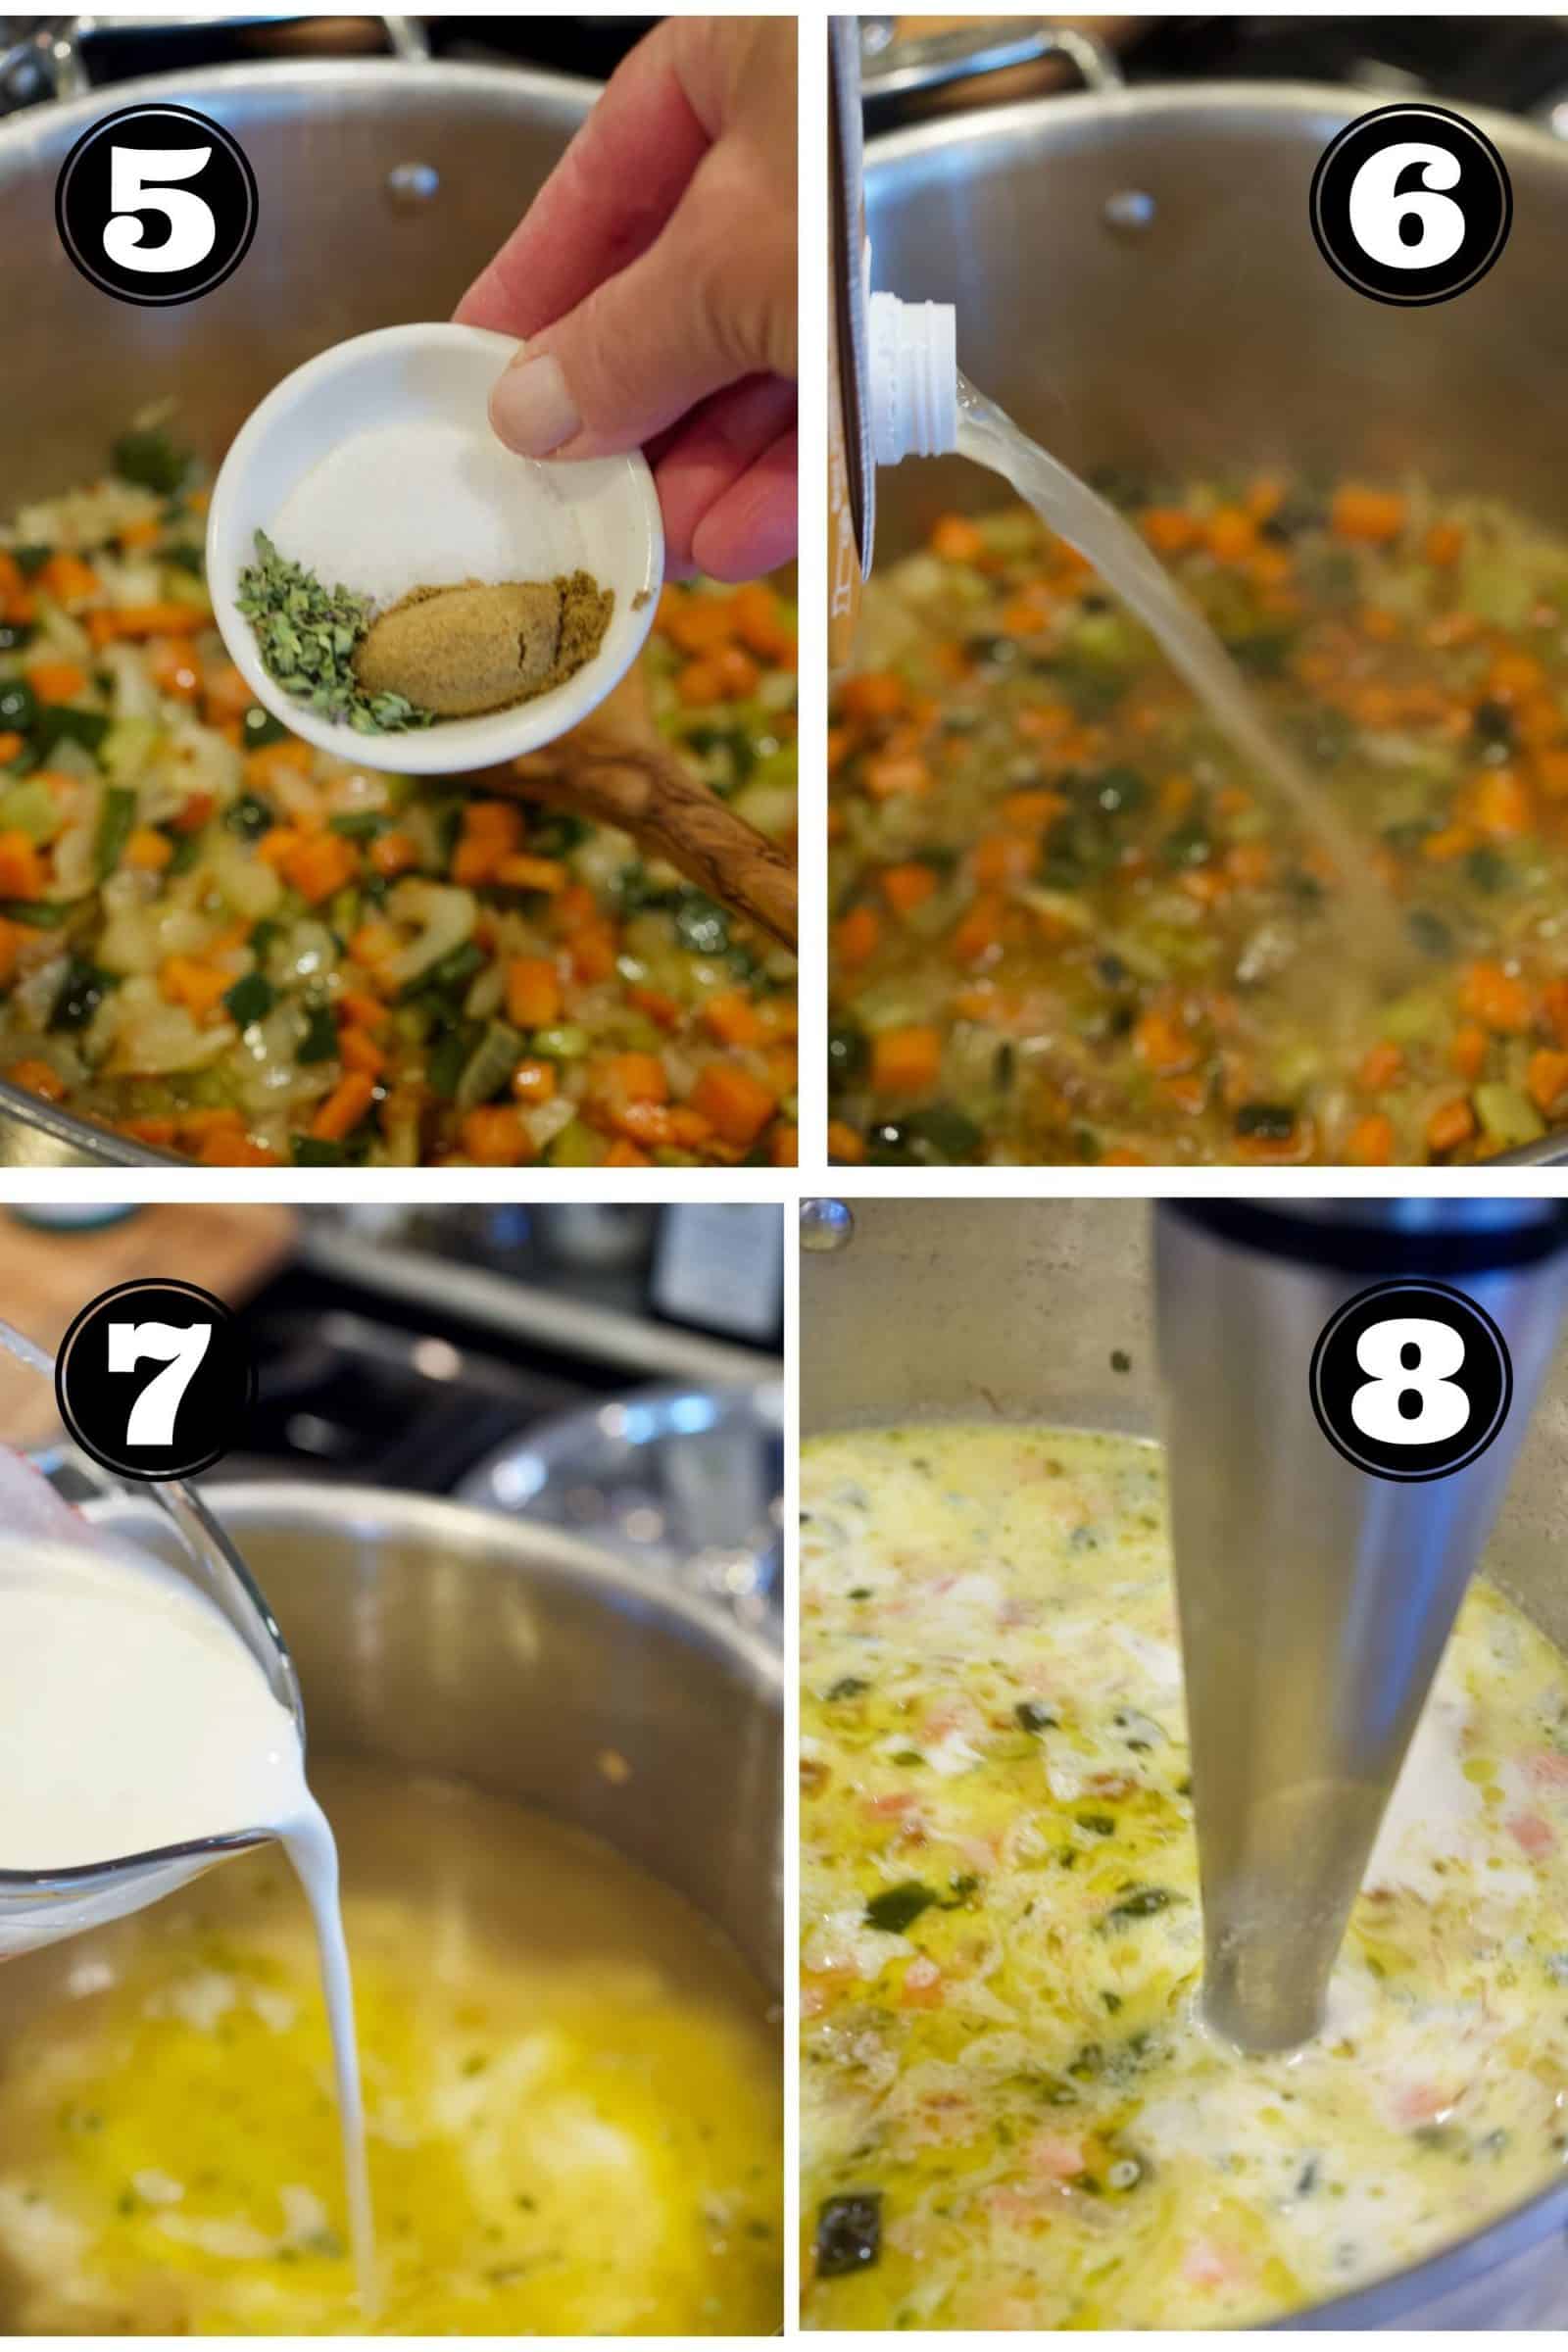 Process shots for Creamy Chicken Poblano Soup 5. adding spices to sauted veggies. 6. Pouring in chicken broth. 7. Adding heavy cream. 8 Using immersion blender to mix veggies and broth.